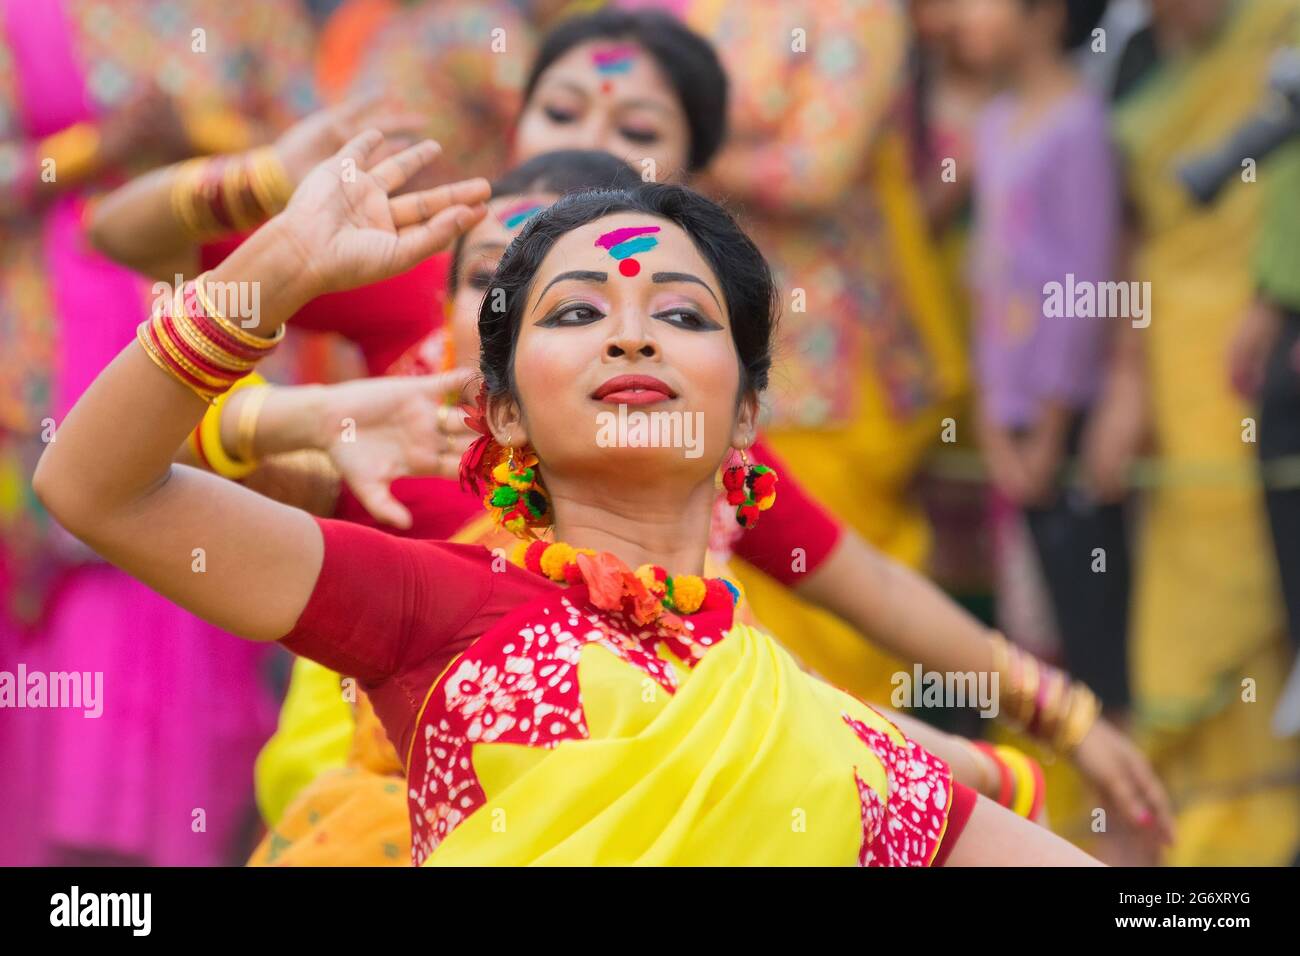 KOLKATA , INDIA - MARCH 12, 2017: Dancing poses of girl dancers , dressed in yellow and red coloured sari (traditional Indian dress) dancing at Spring Stock Photo